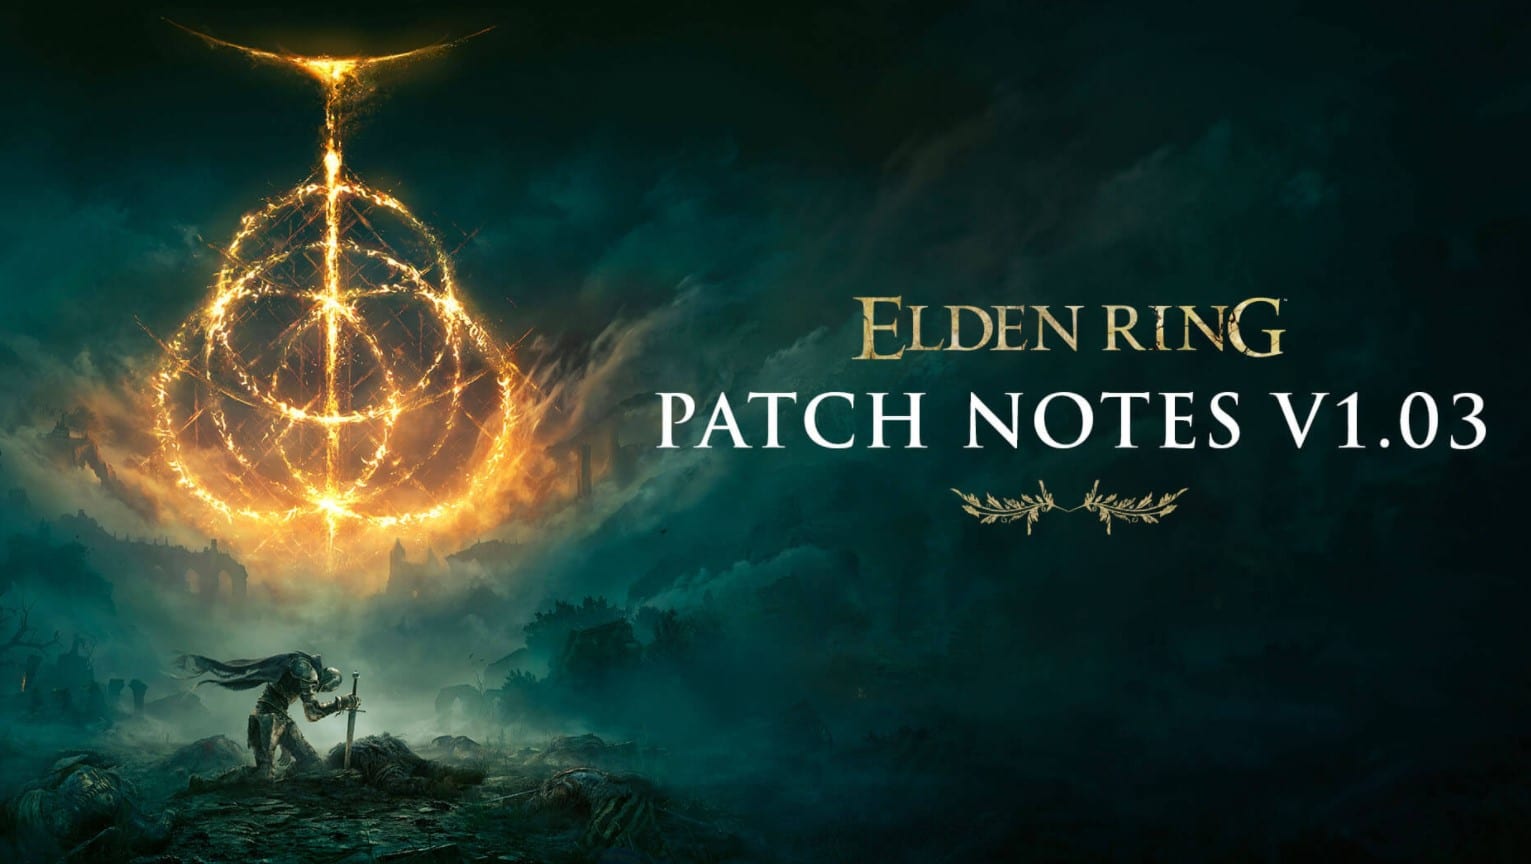 Elden Ring Patch 1.03 is now live